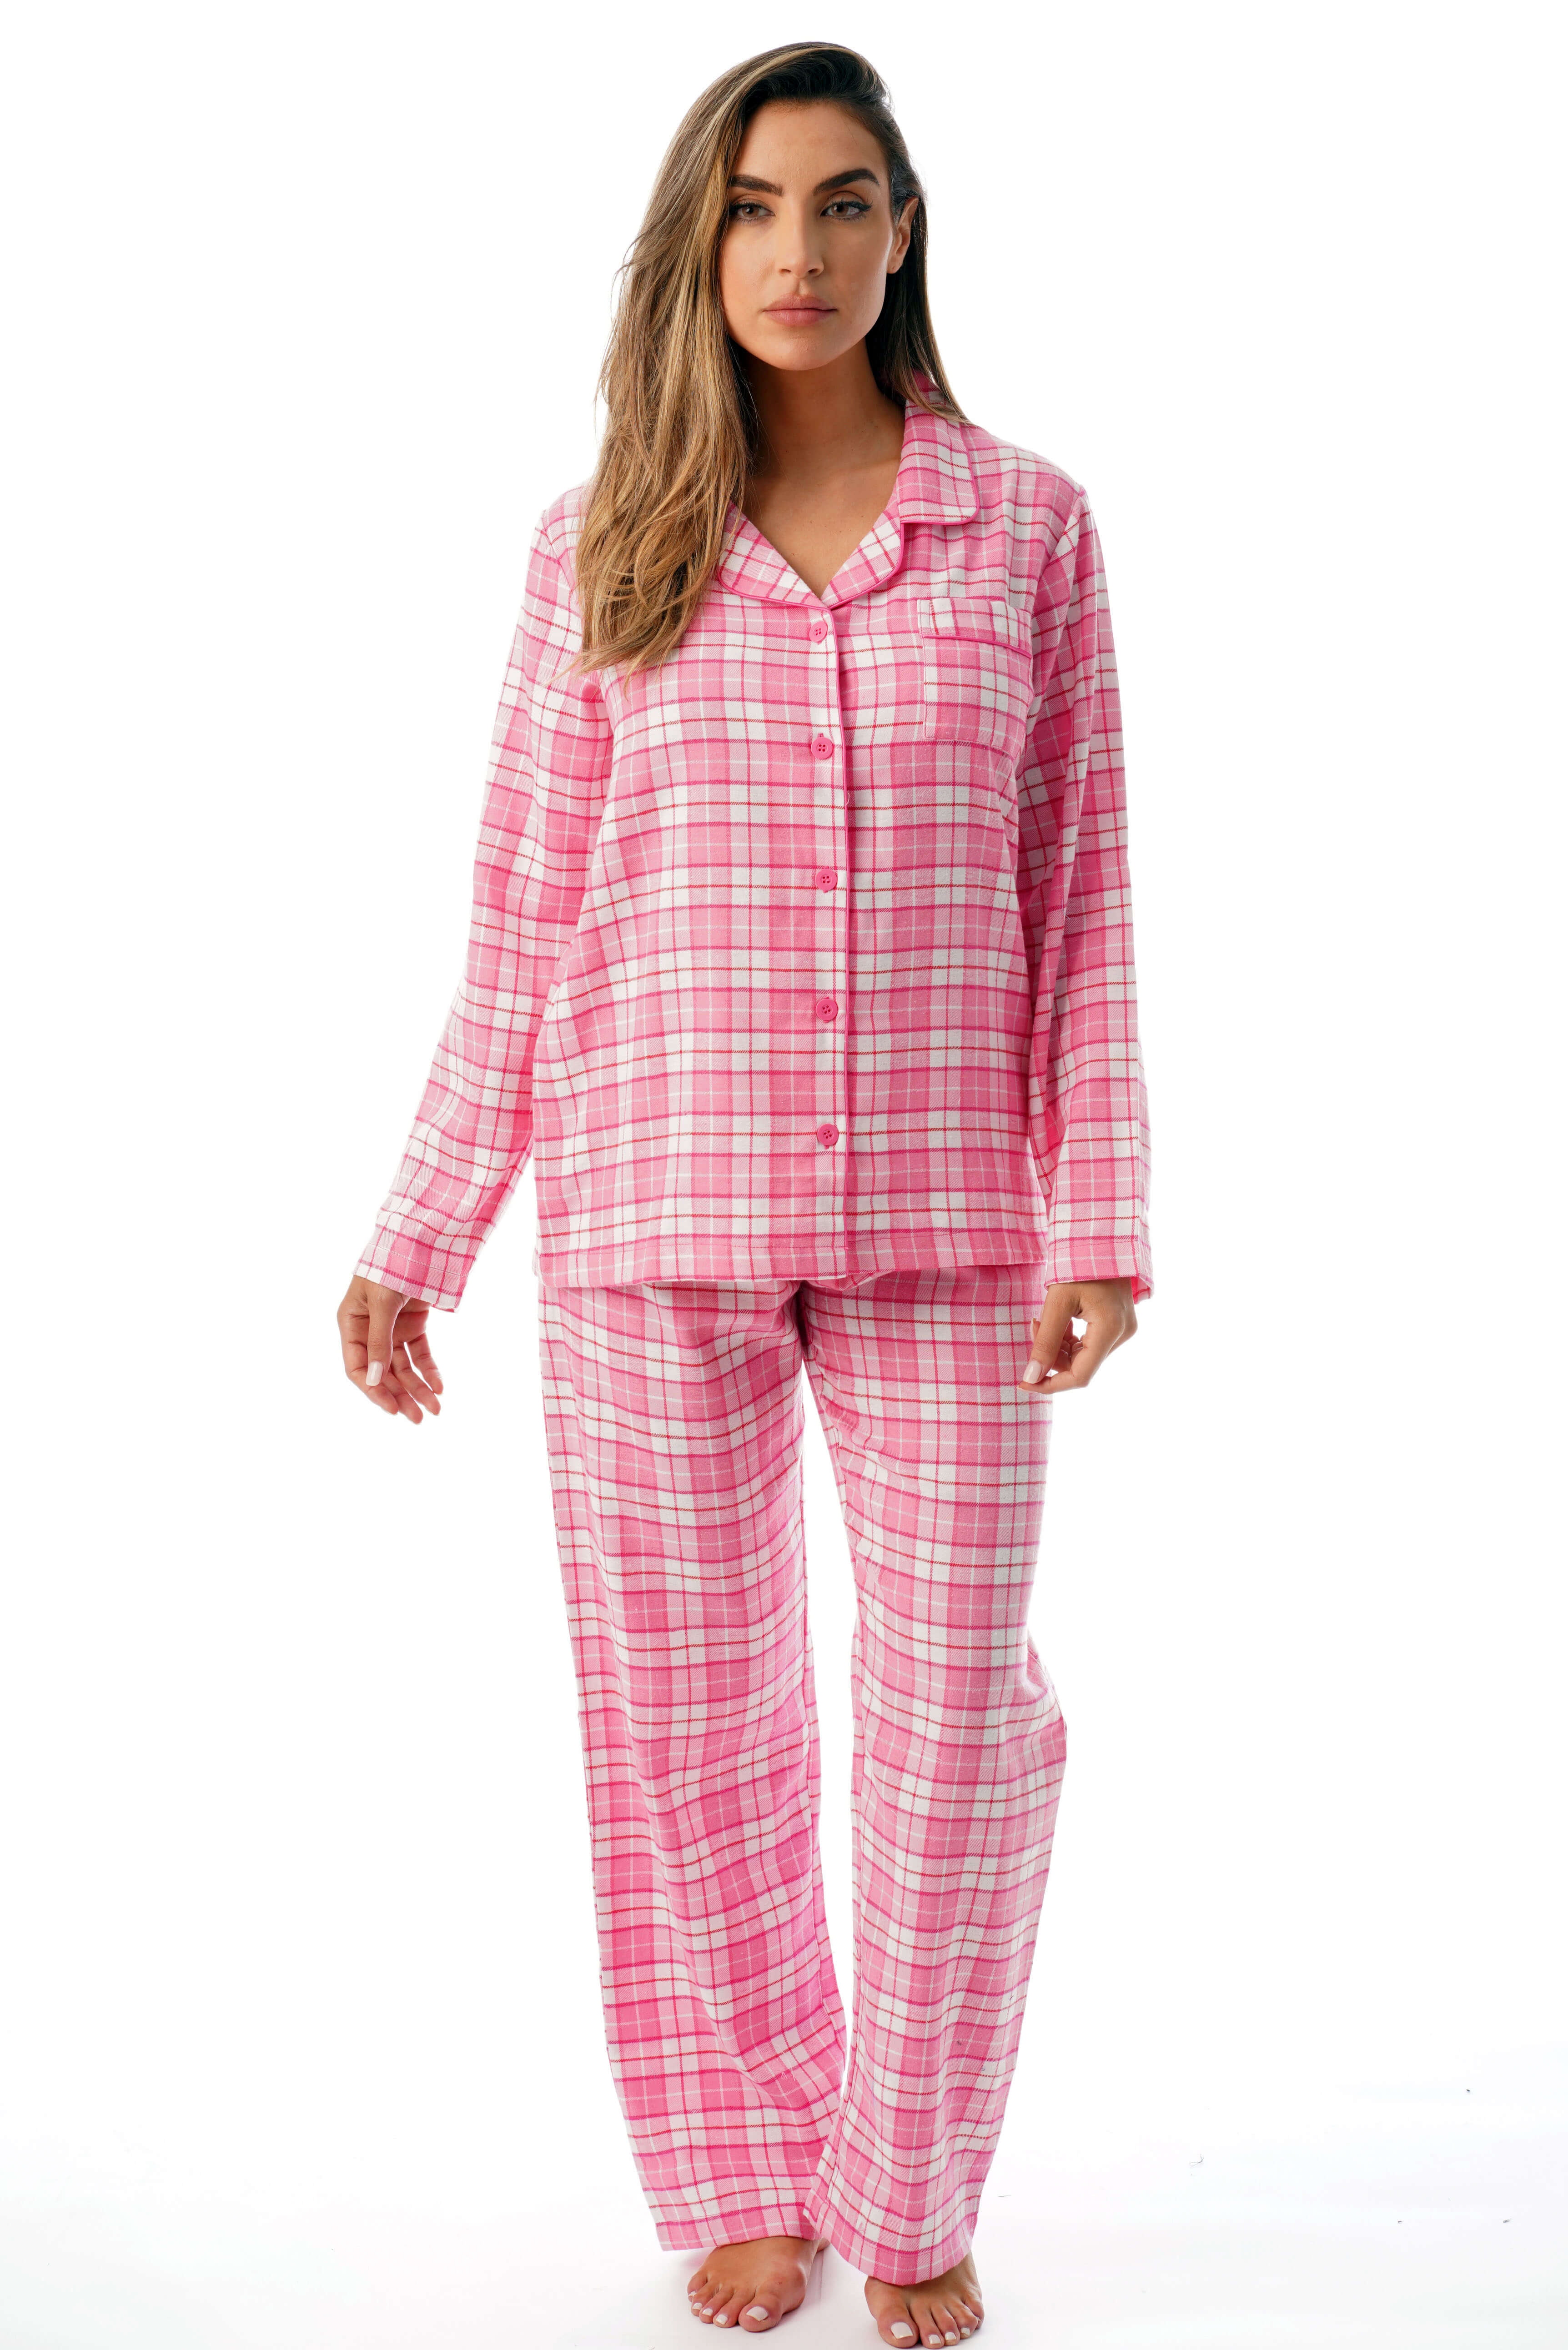 Just Love Long Sleeve Flannel Pajama Sets for Women 6760-10195-RED-2X ...